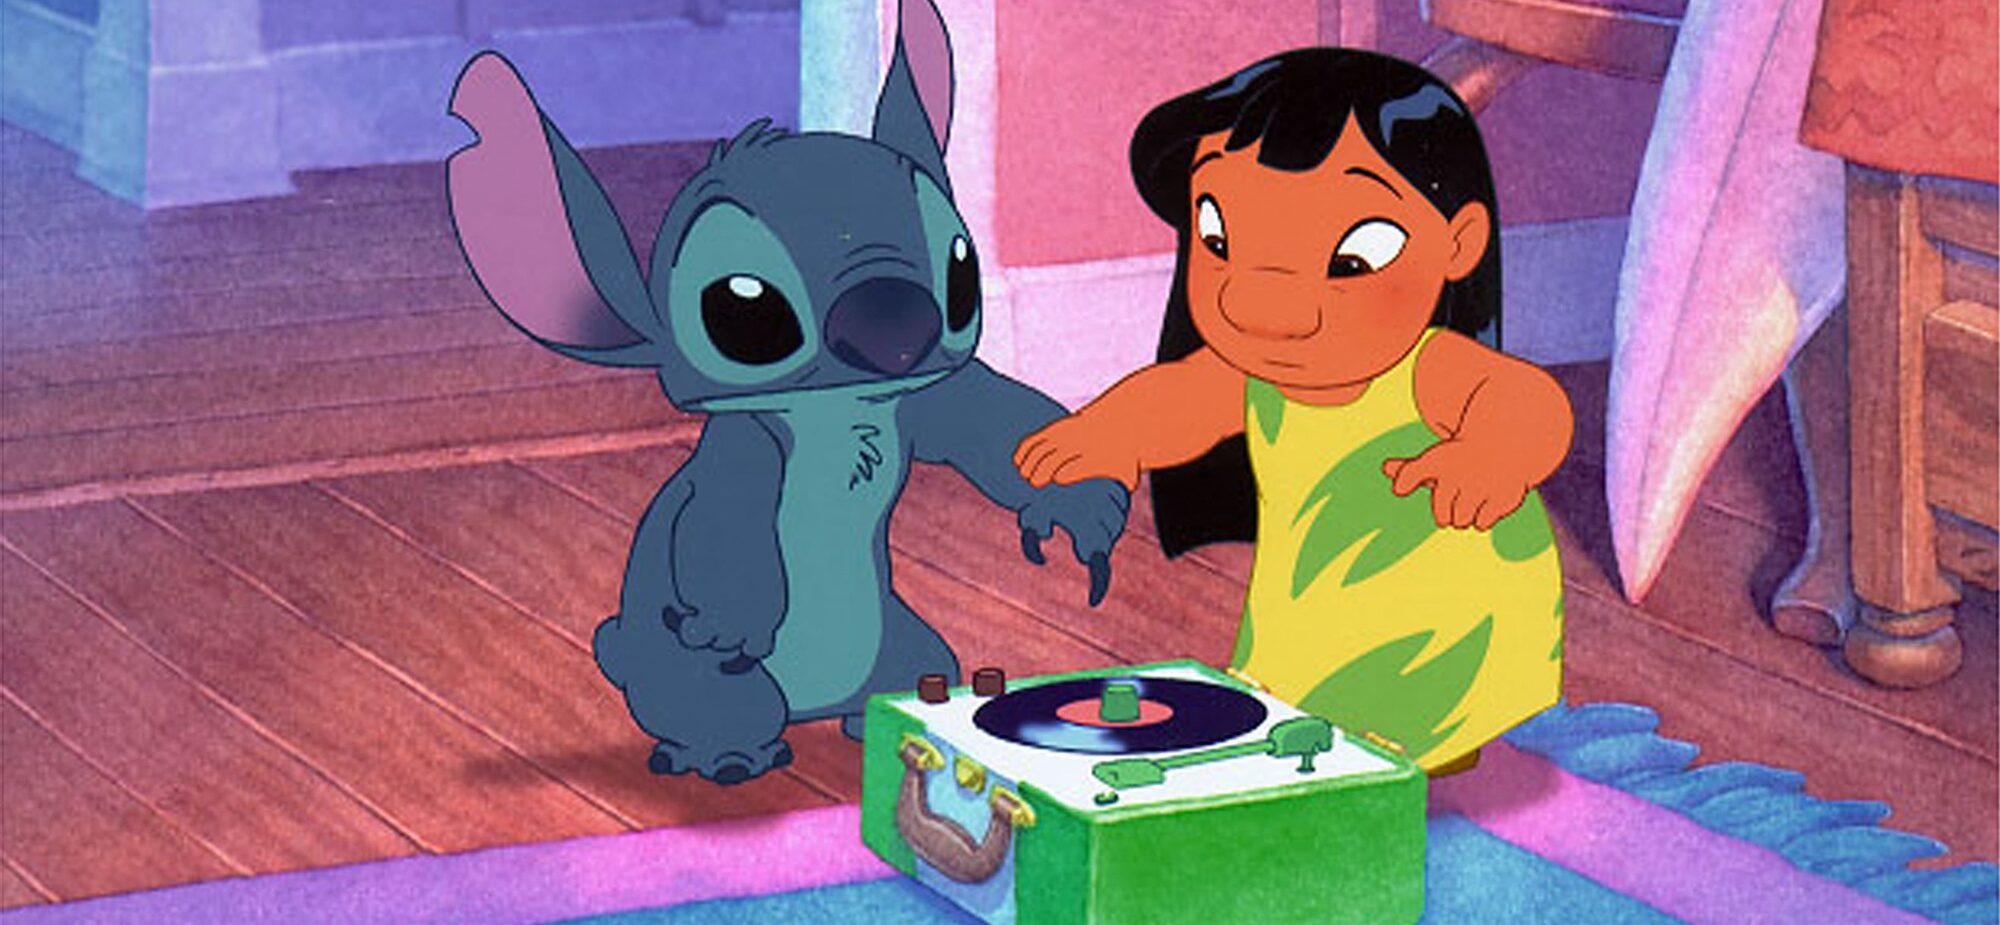 'Lilo & Stitch' Creator Chris Sanders Files For Divorce After 8-Years Of Marriage